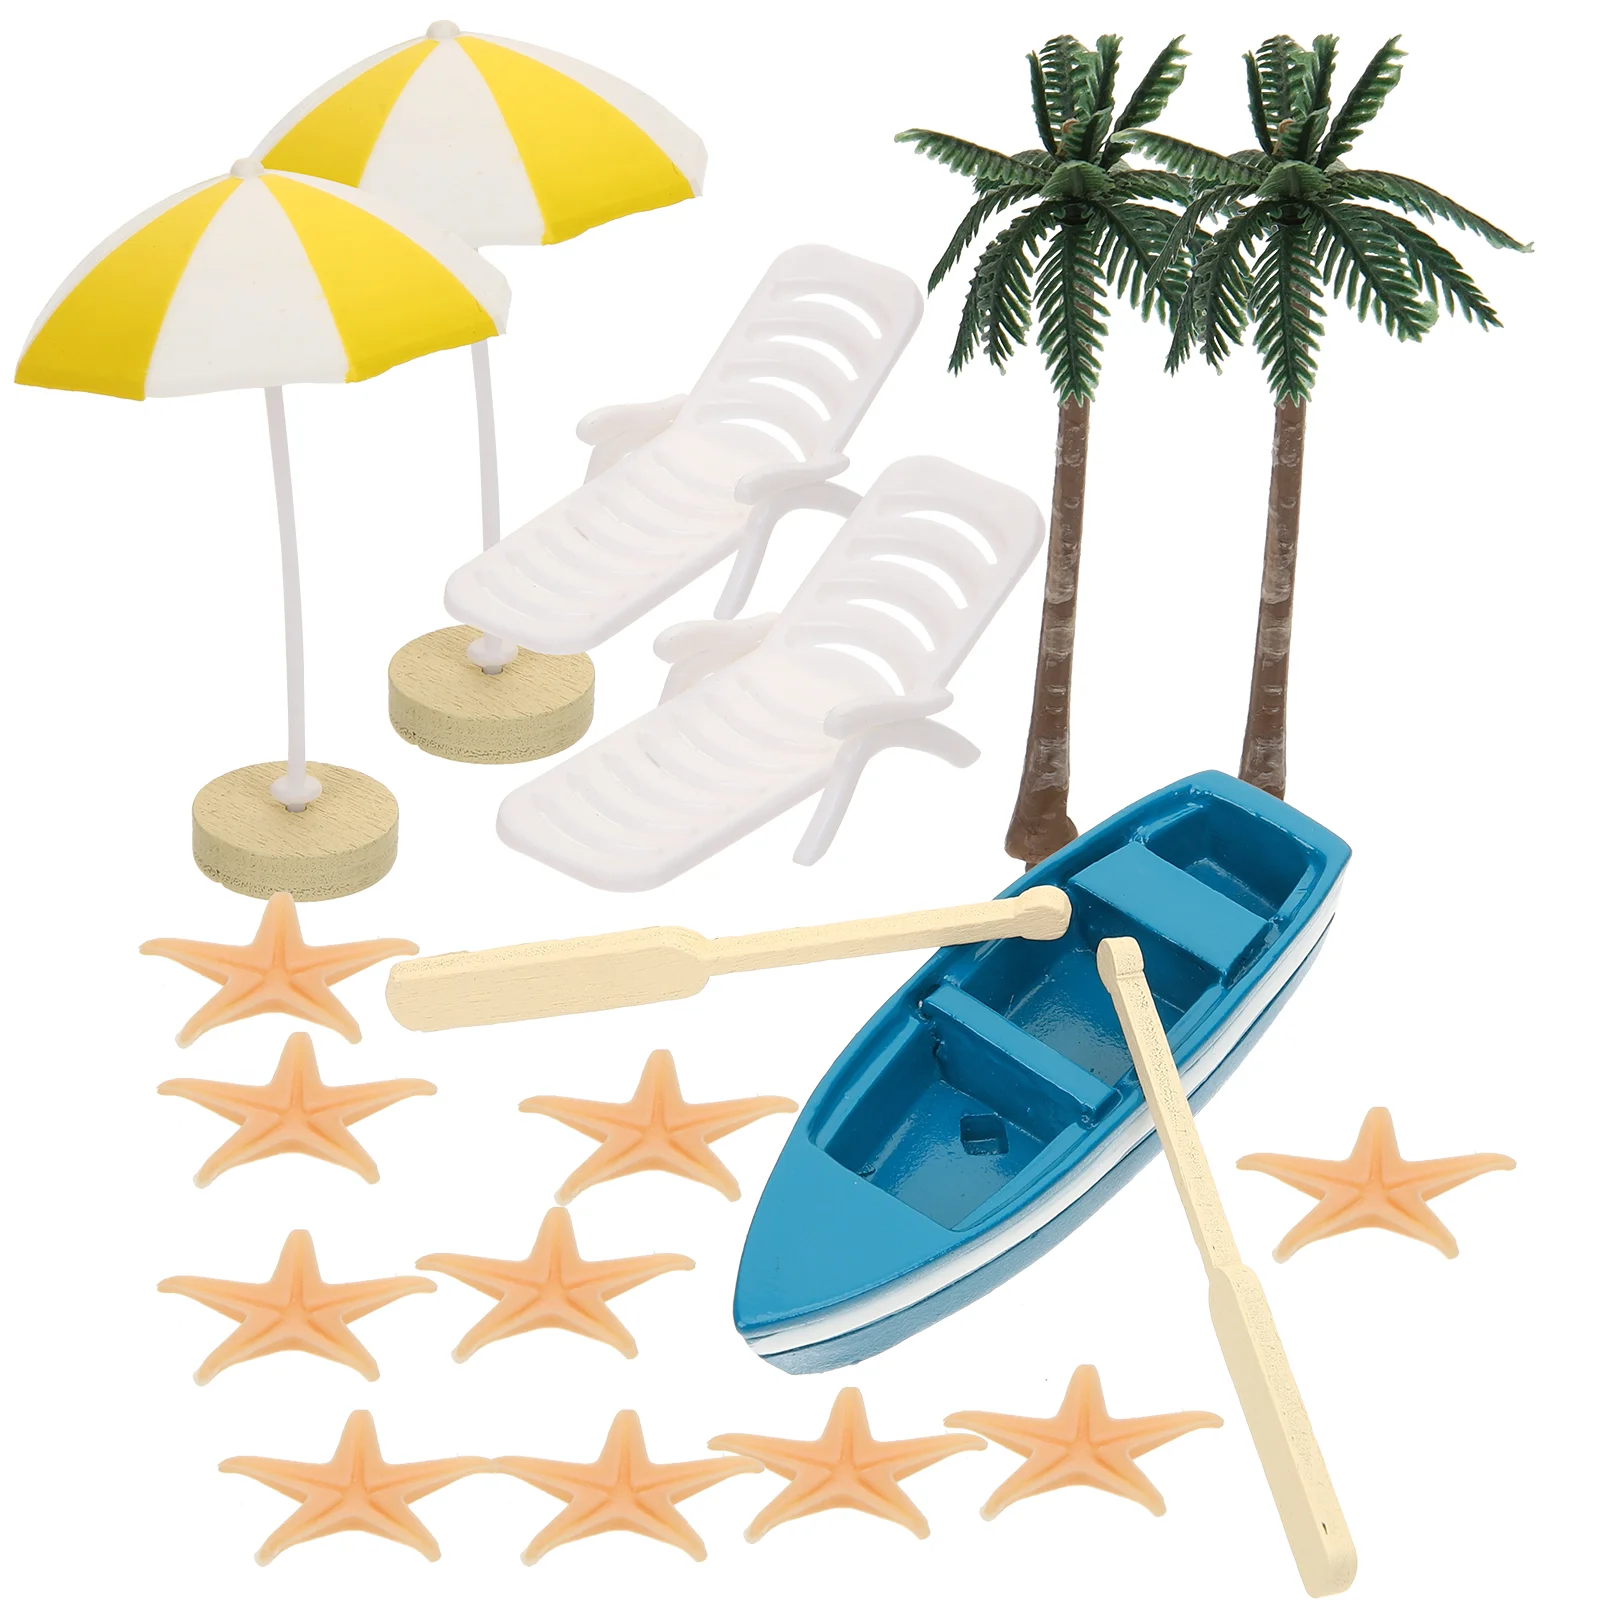 

17 Pcs Beach Mini Decoration Kit Palm Tree Boat Suite Chair Tiny Synthetic Resin Umbrella Seaside Miniature Accessories